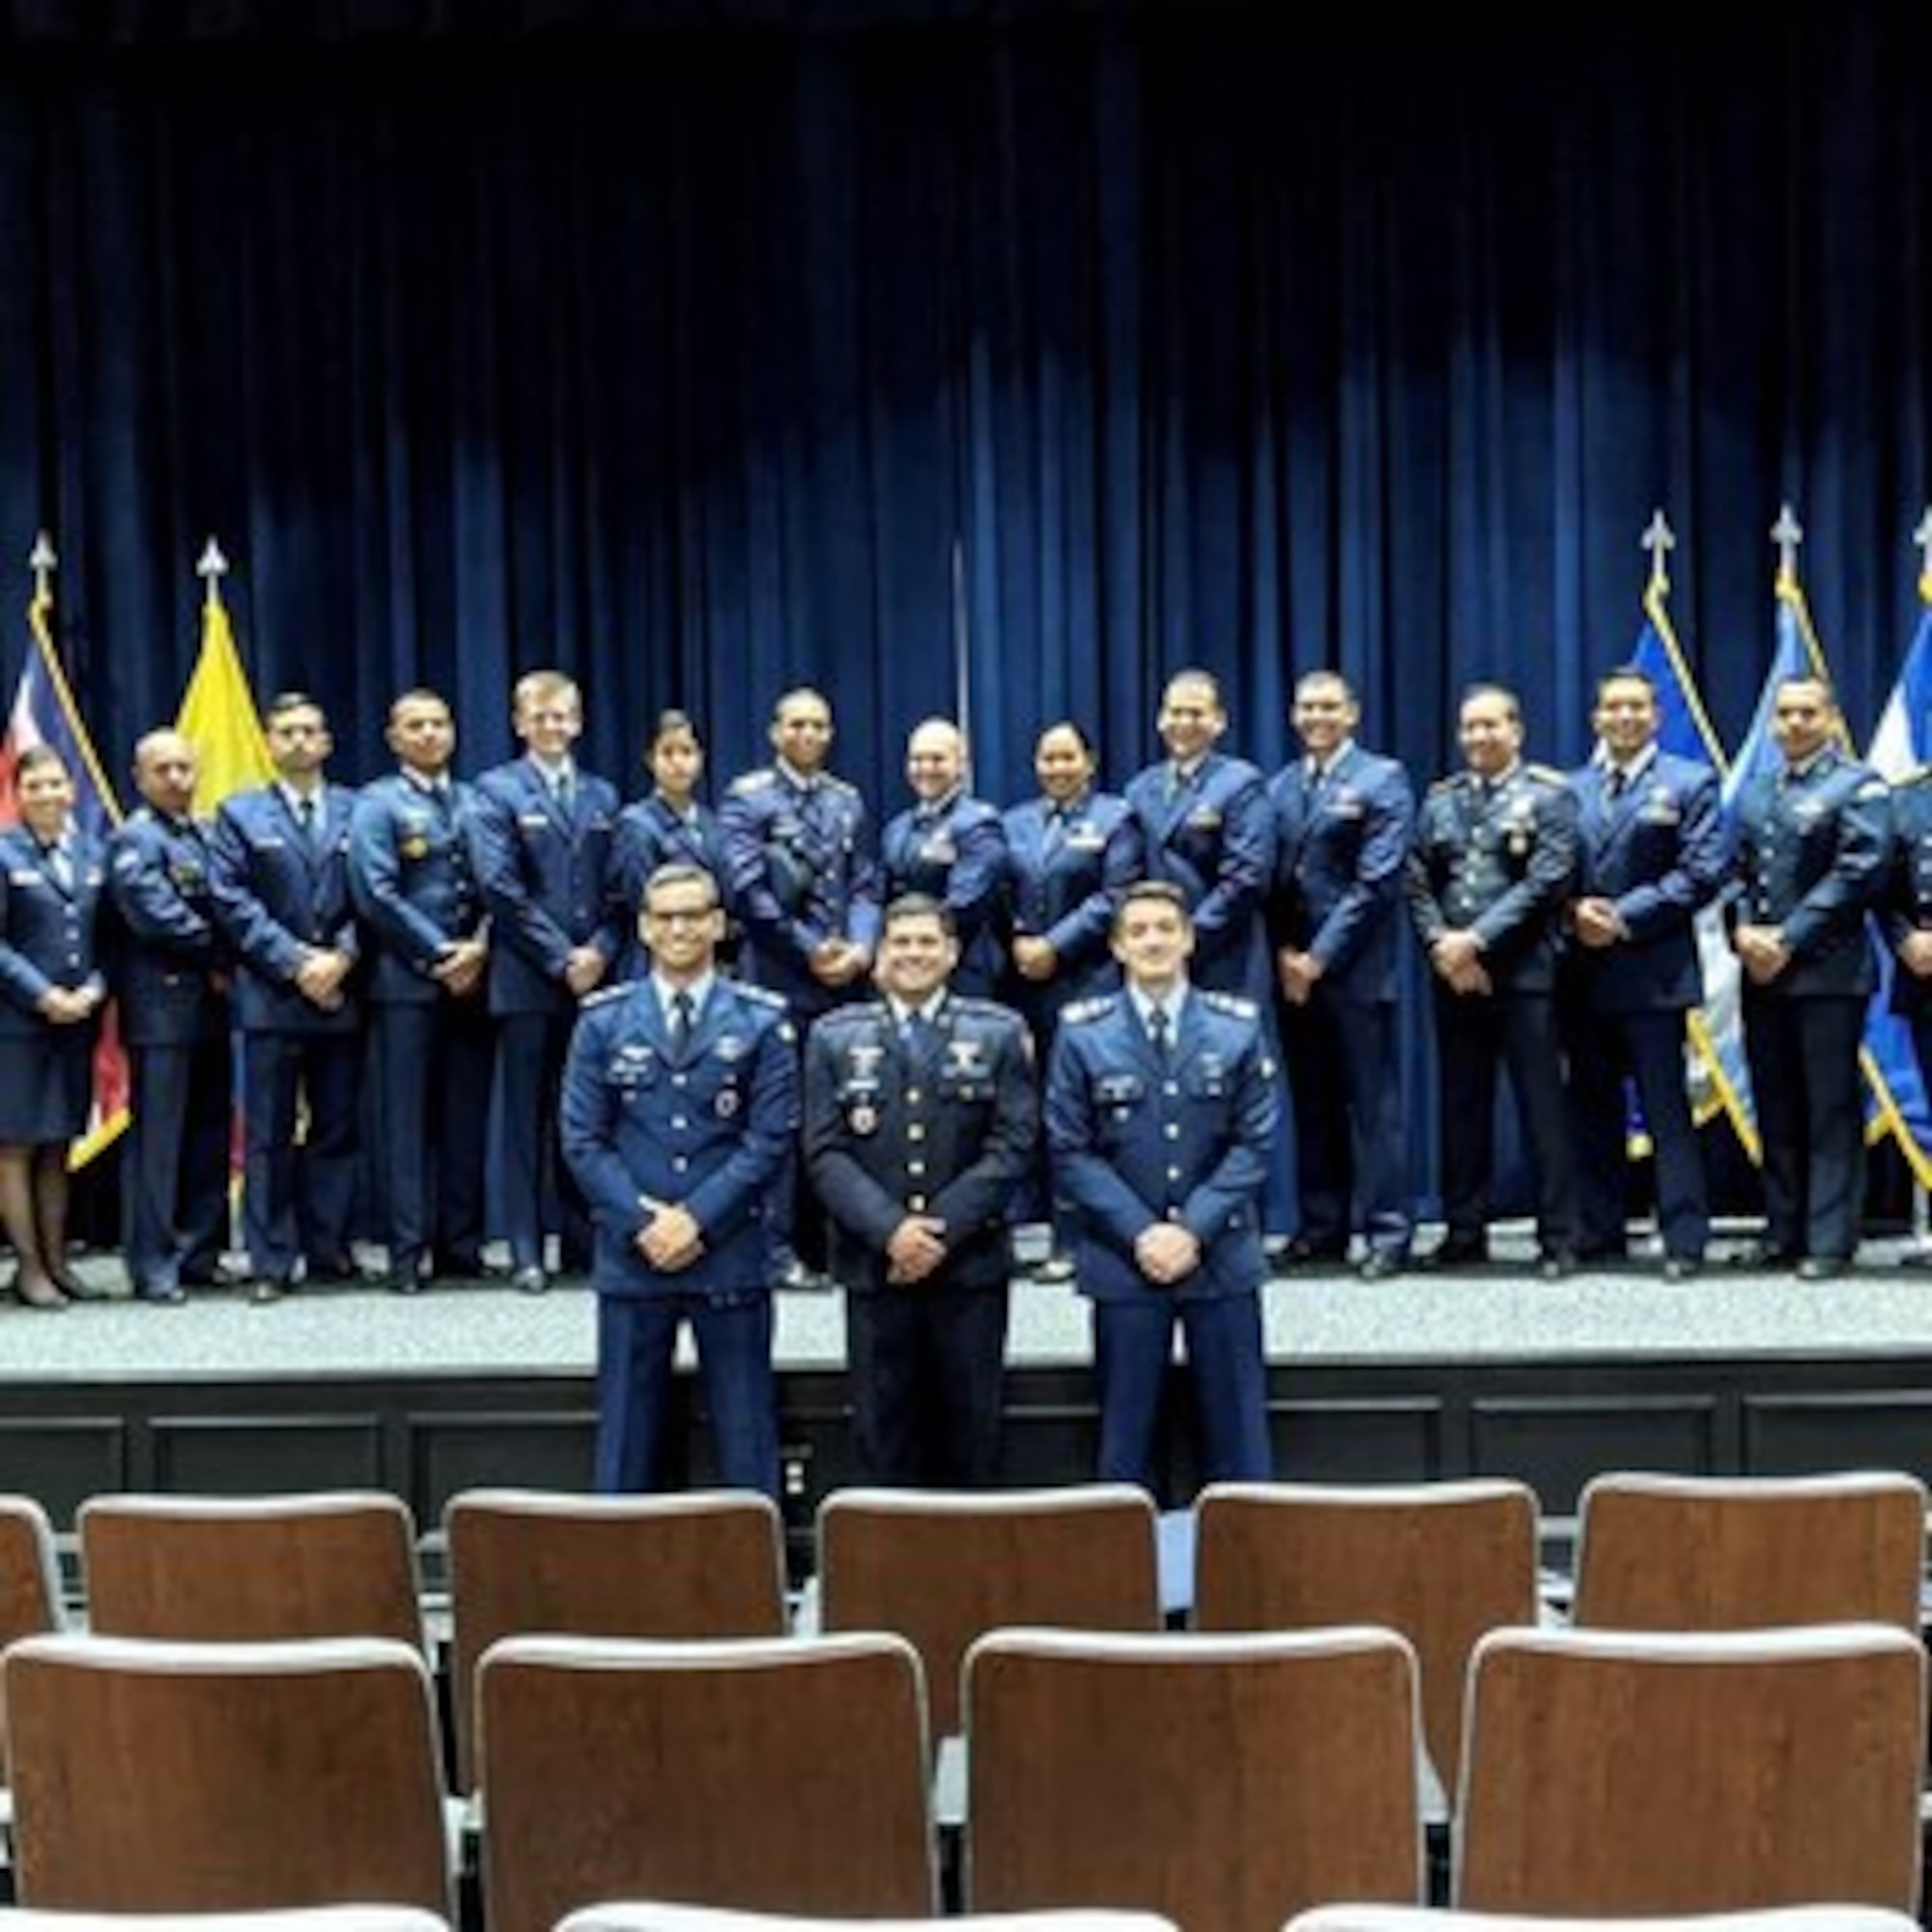 U.S. Air Force officer attends Inter-American group training.